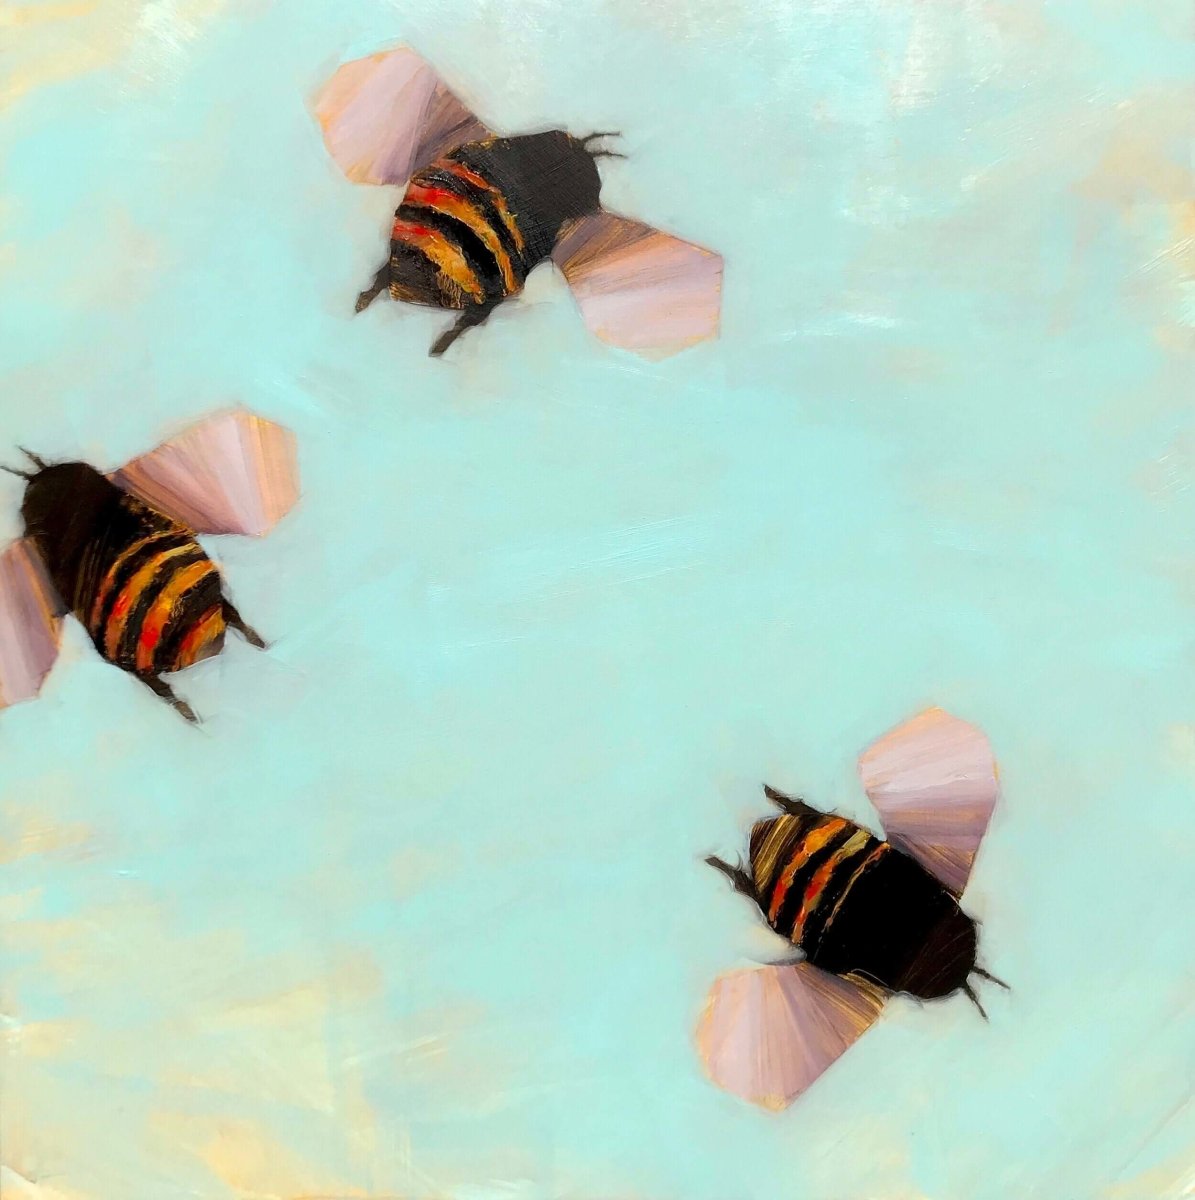 Bees 2-26 by Angie Renfro at LePrince Galleries